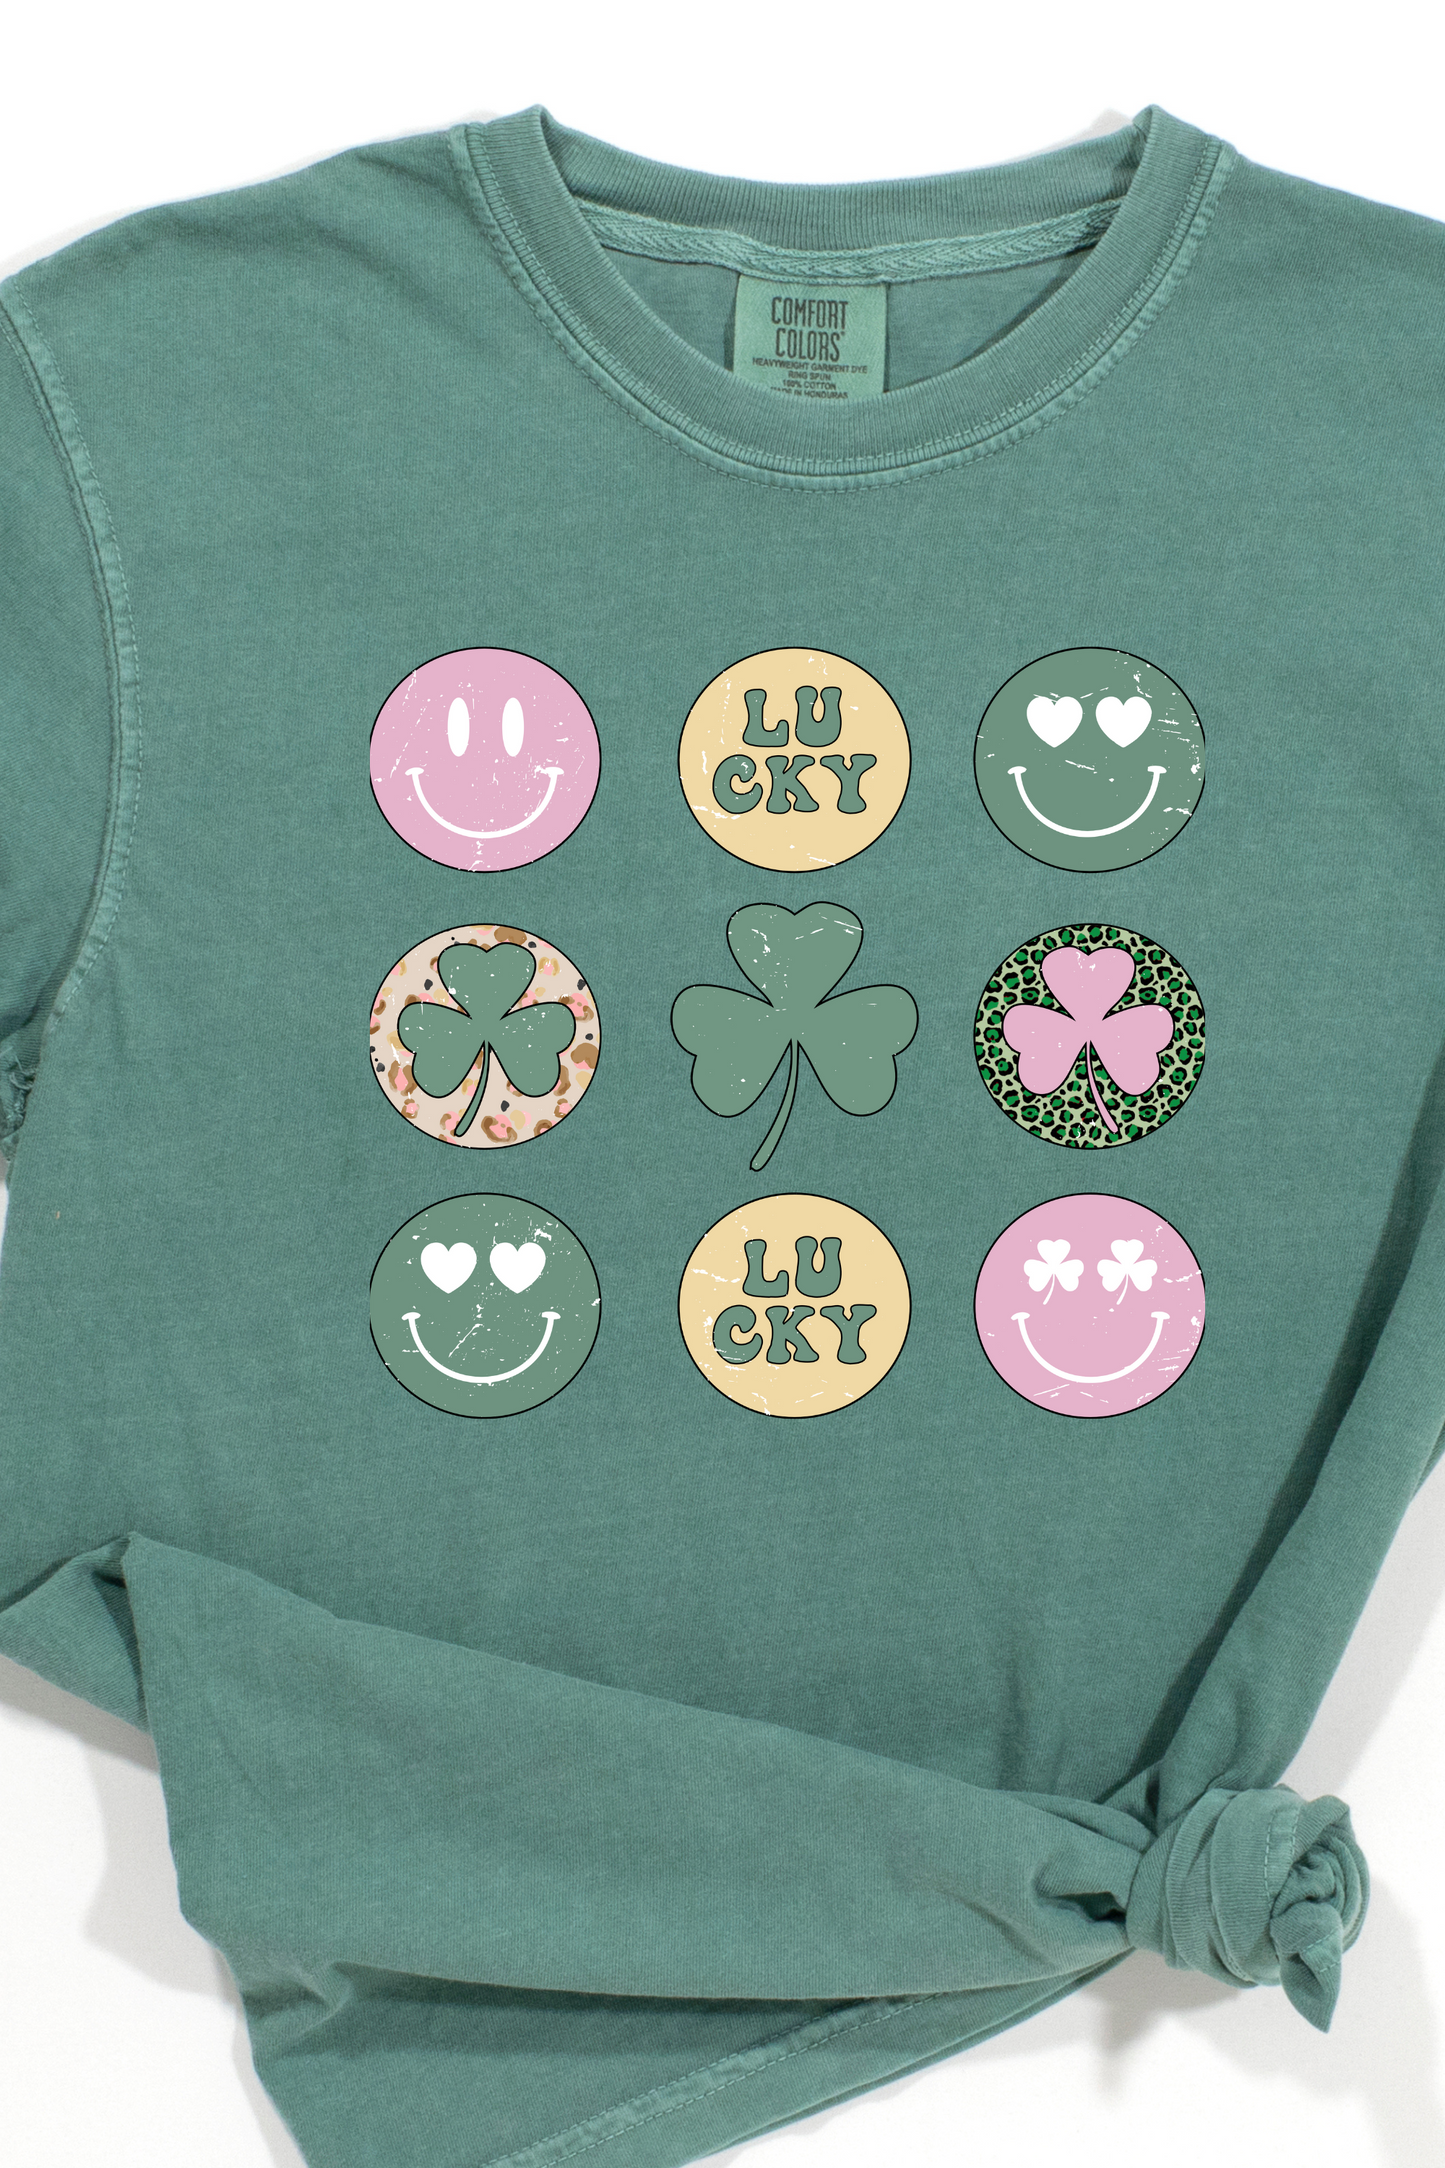 RETRO LUCKY SHAMROCK TEE (COMFORT COLORS) - 3 Colors